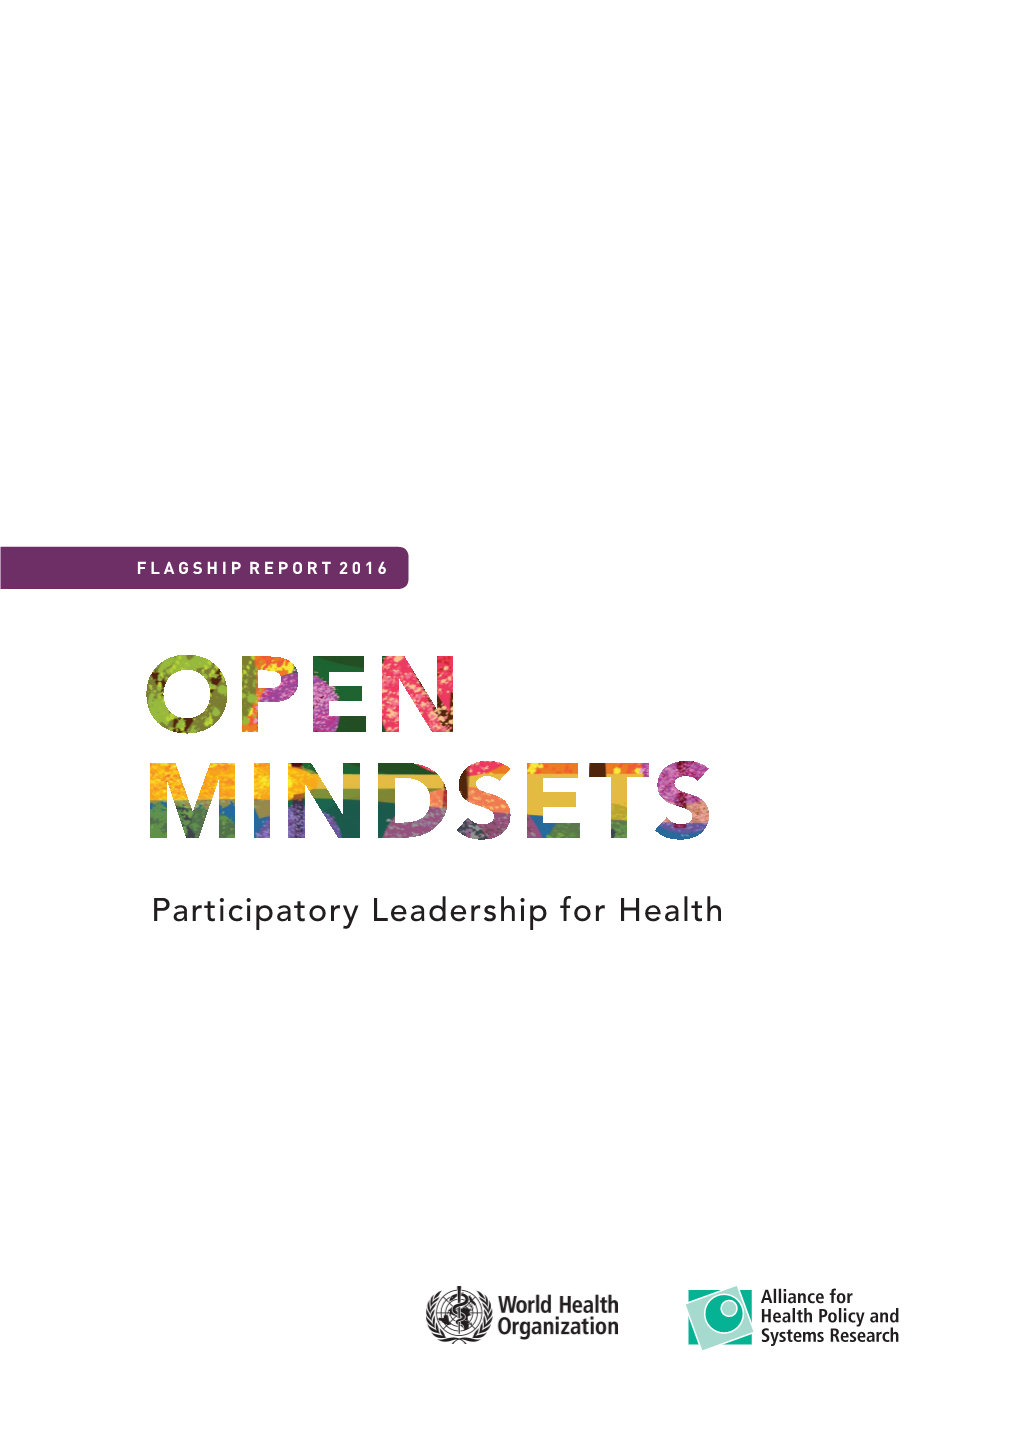 Open Mindsets: Participatory Leadership for Health